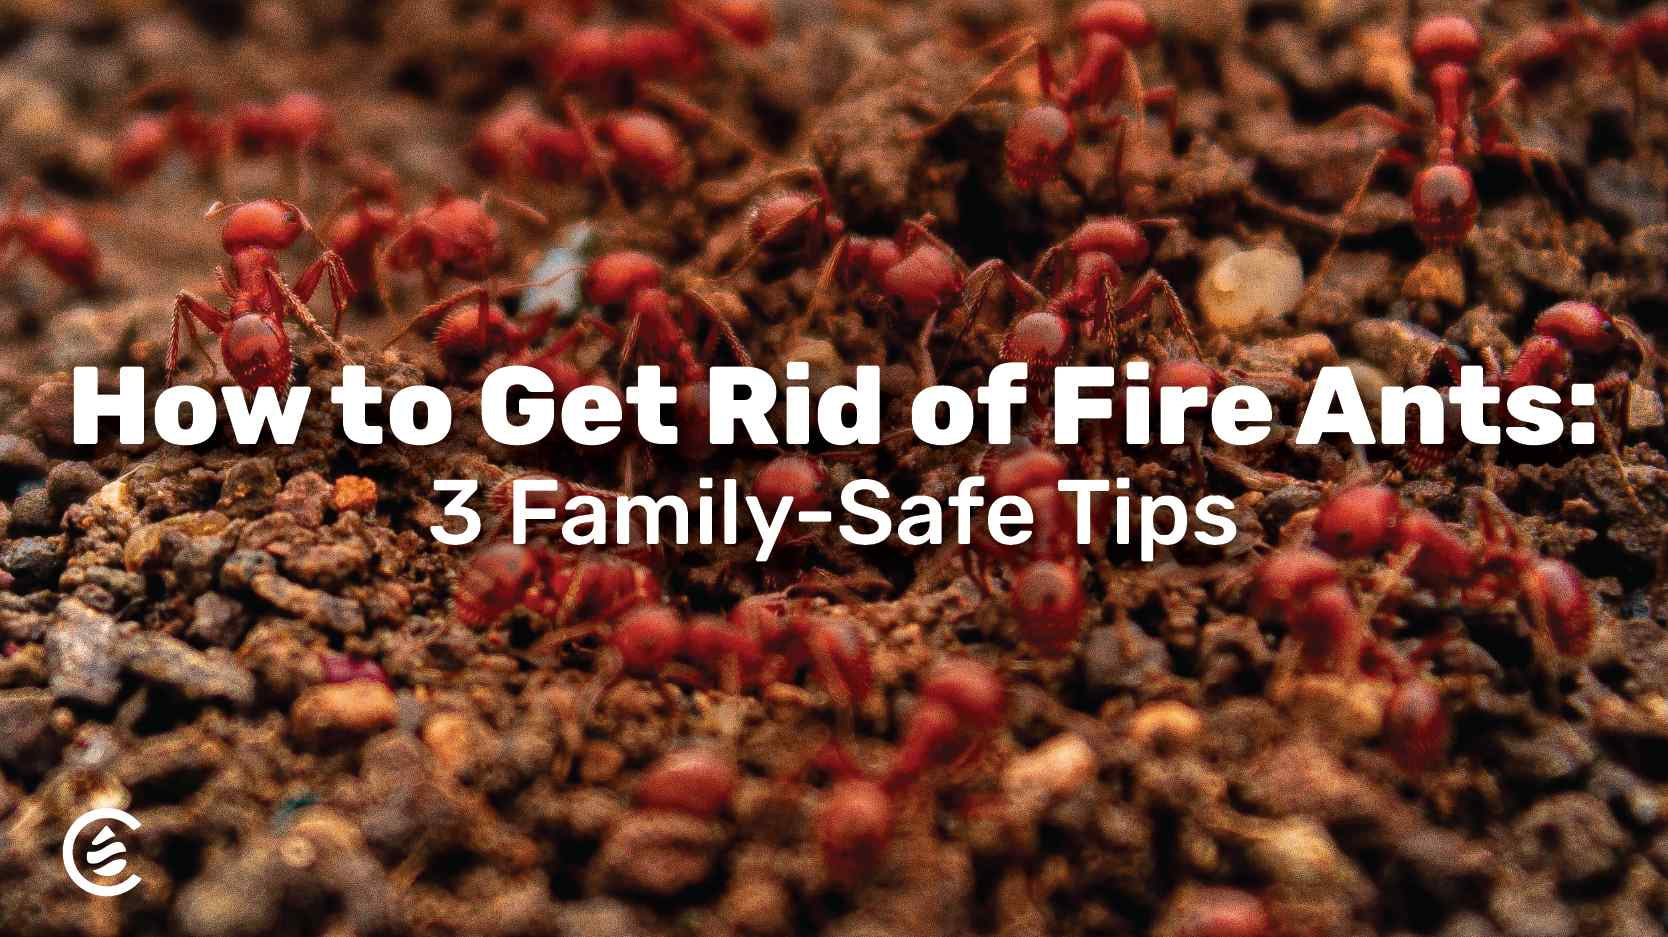 Cedarcide Blog Post Image, How to Get Rid of Fire Ants: 3 Family-Safe Tips